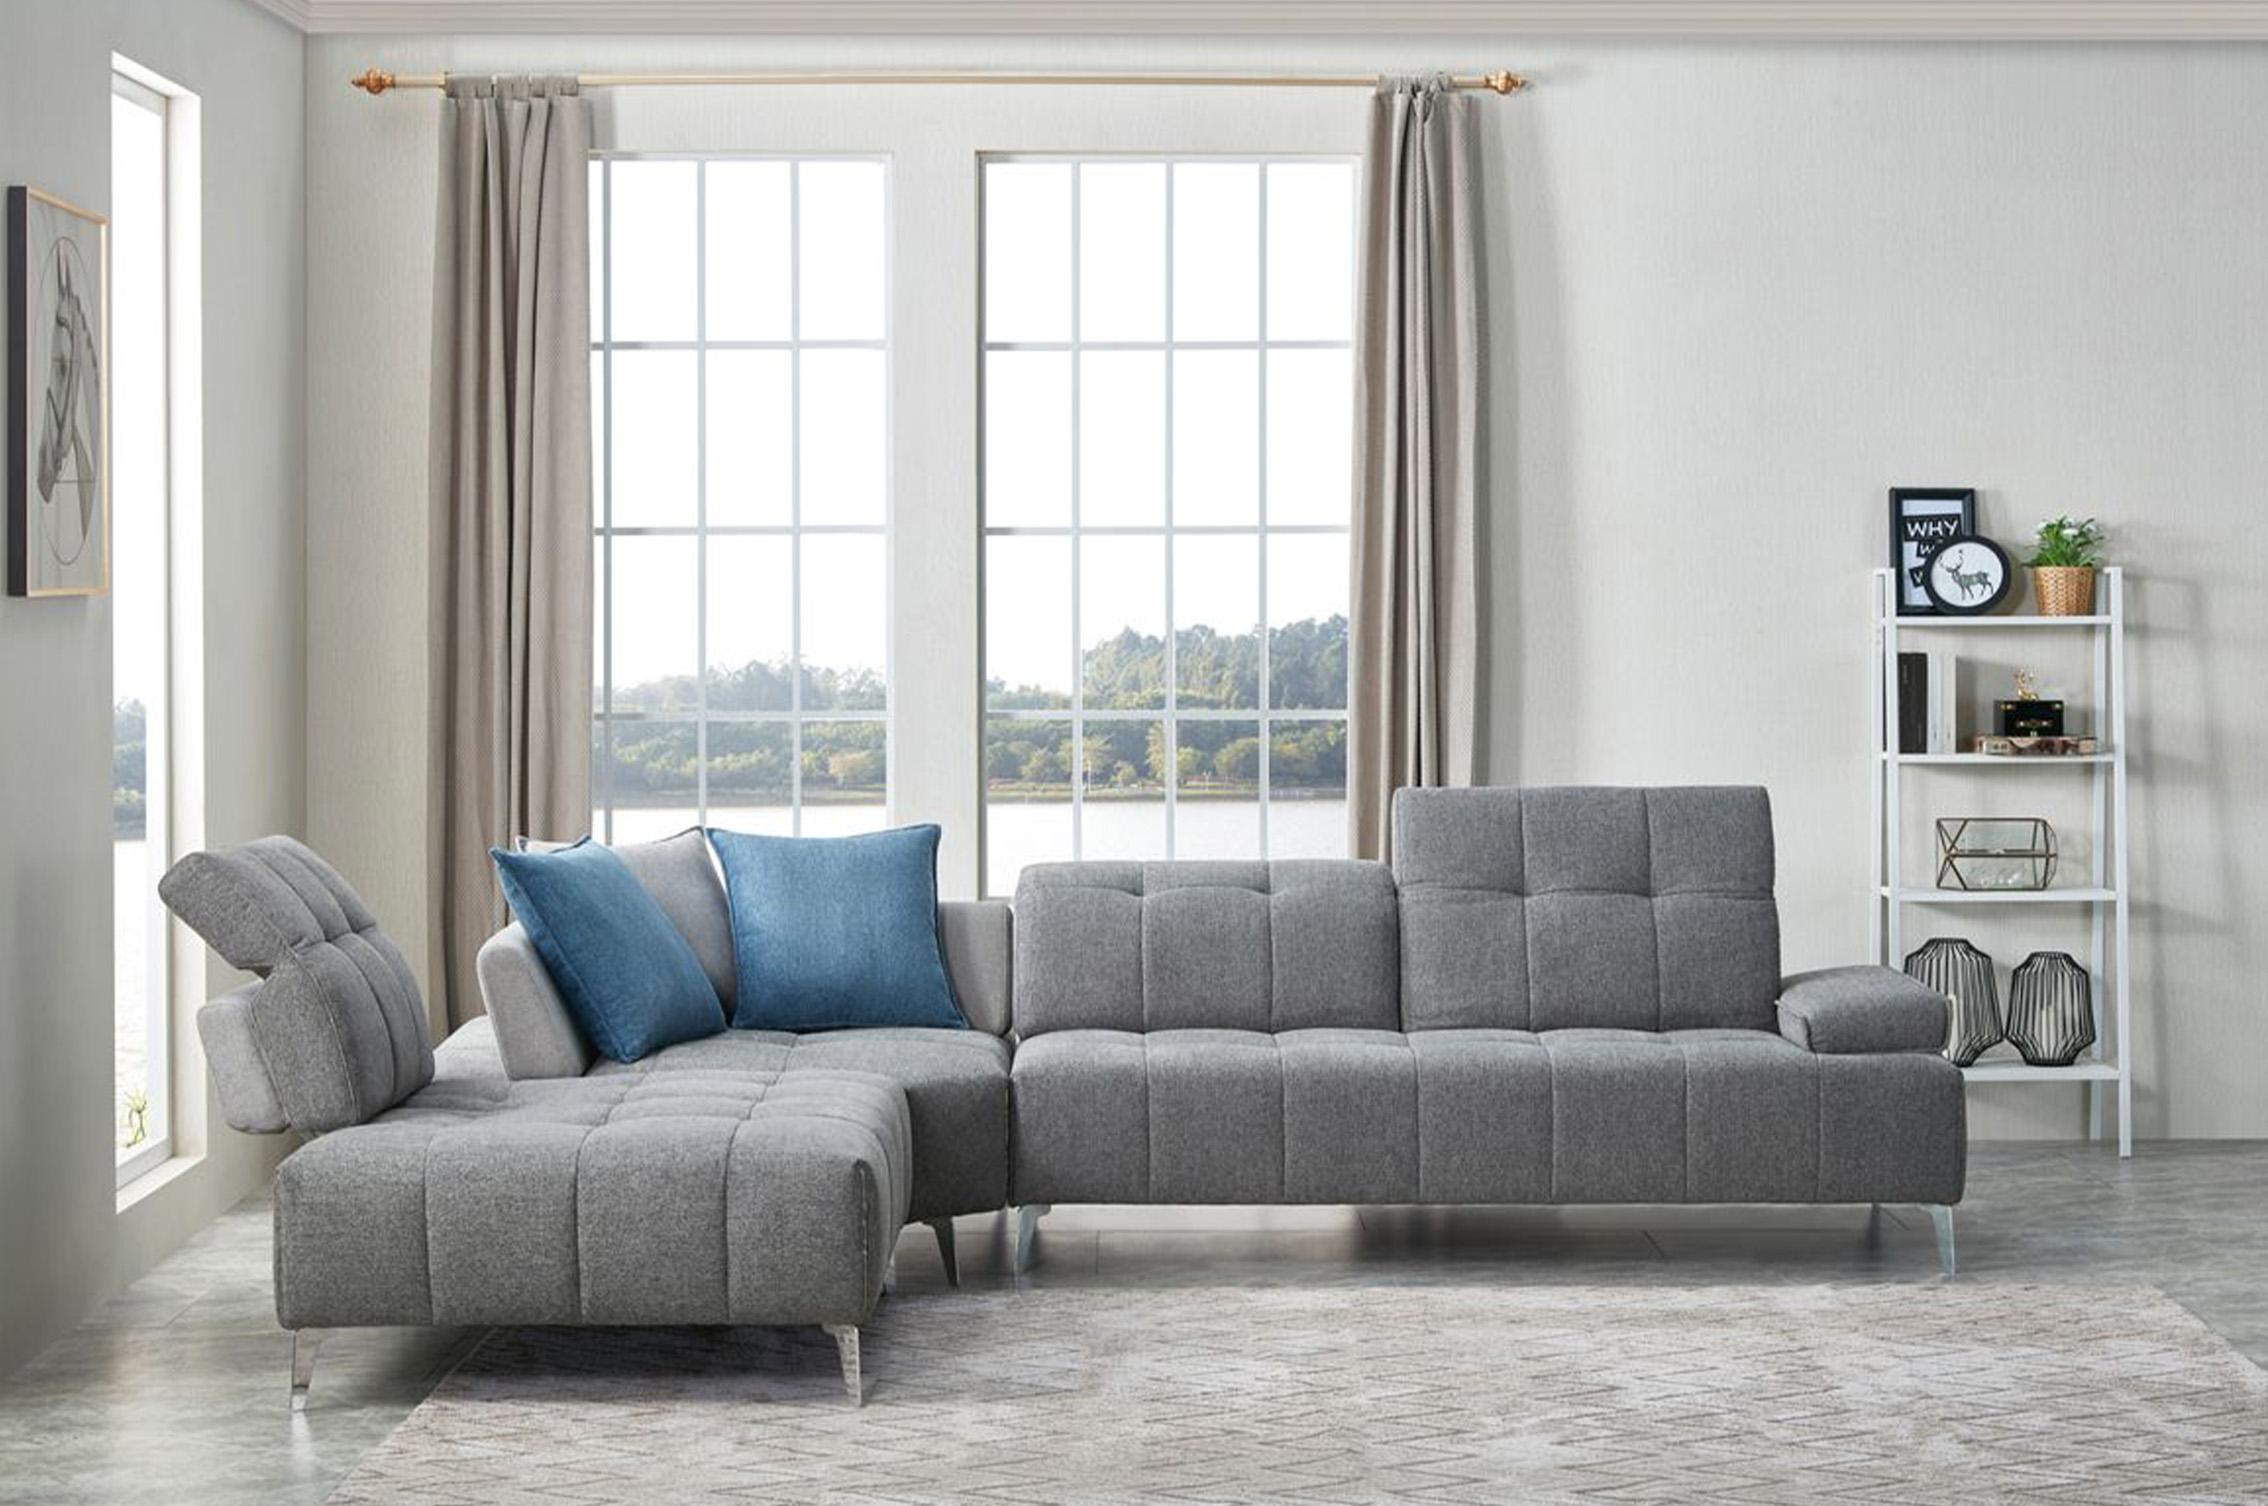 Contemporary, Modern Sectional Sofa VGMB-1808-GRY VGMB-1808-GRY in Gray Fabric